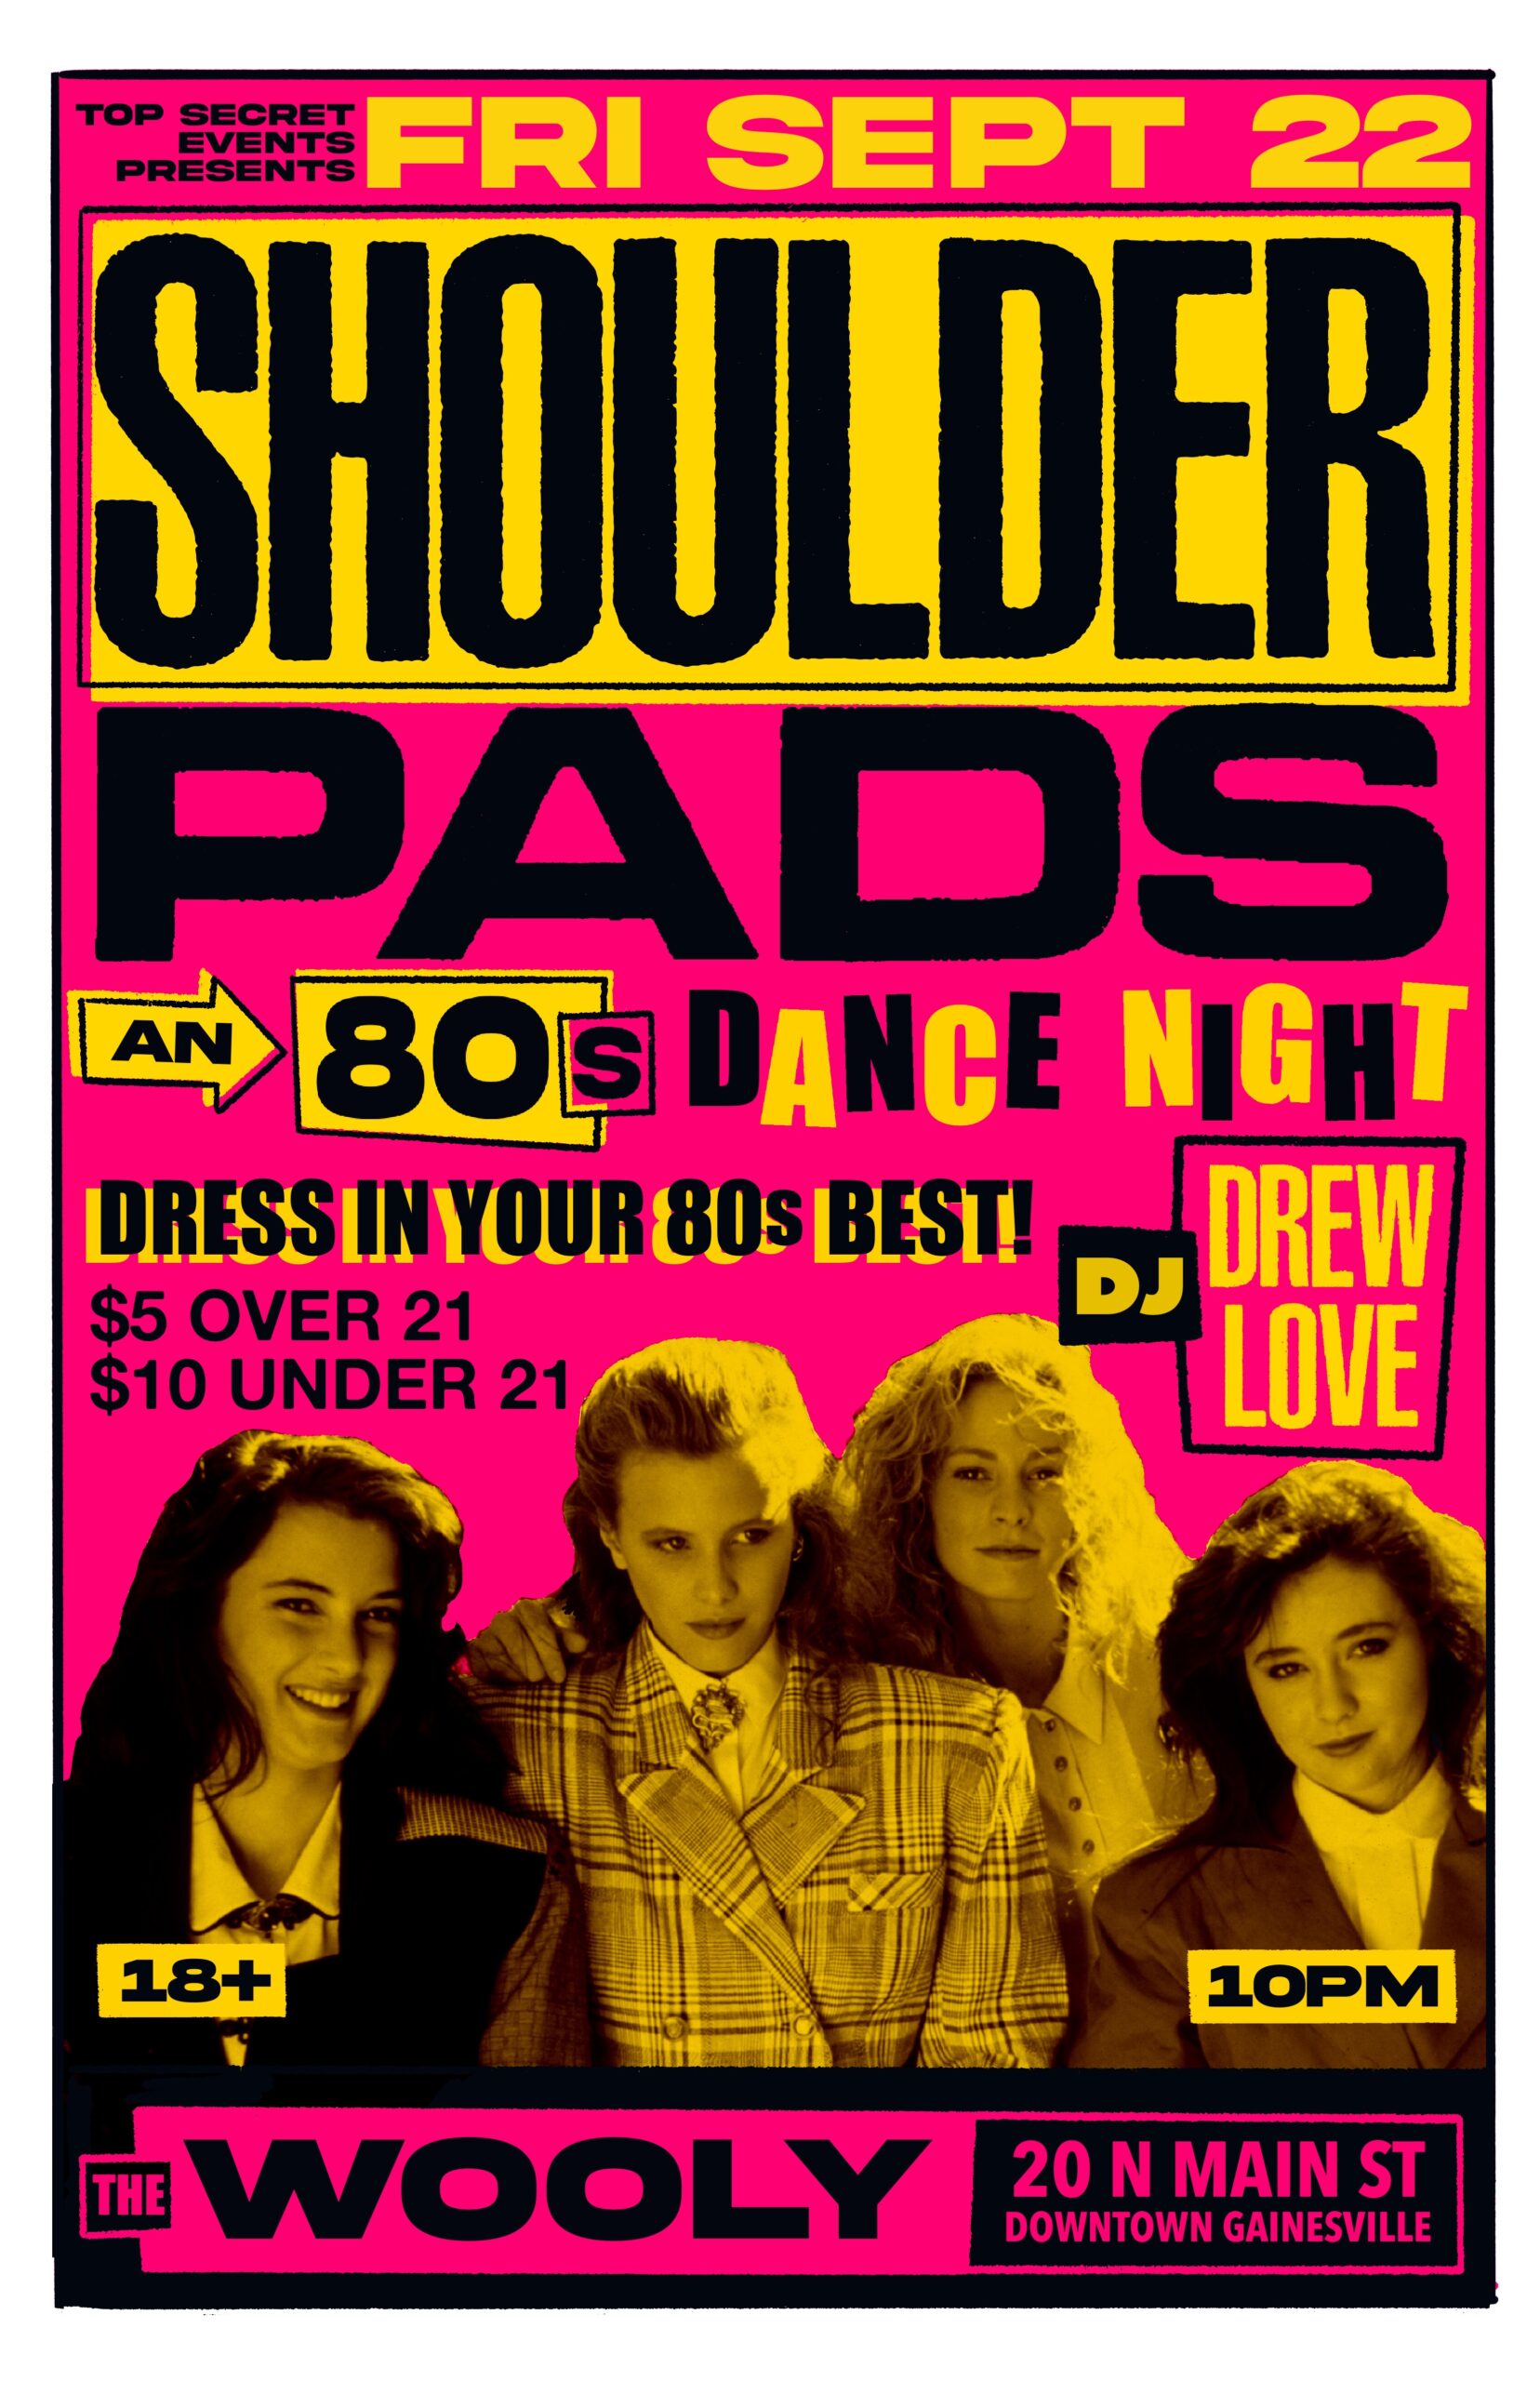 shoulder pads 80s dance night at the wooly